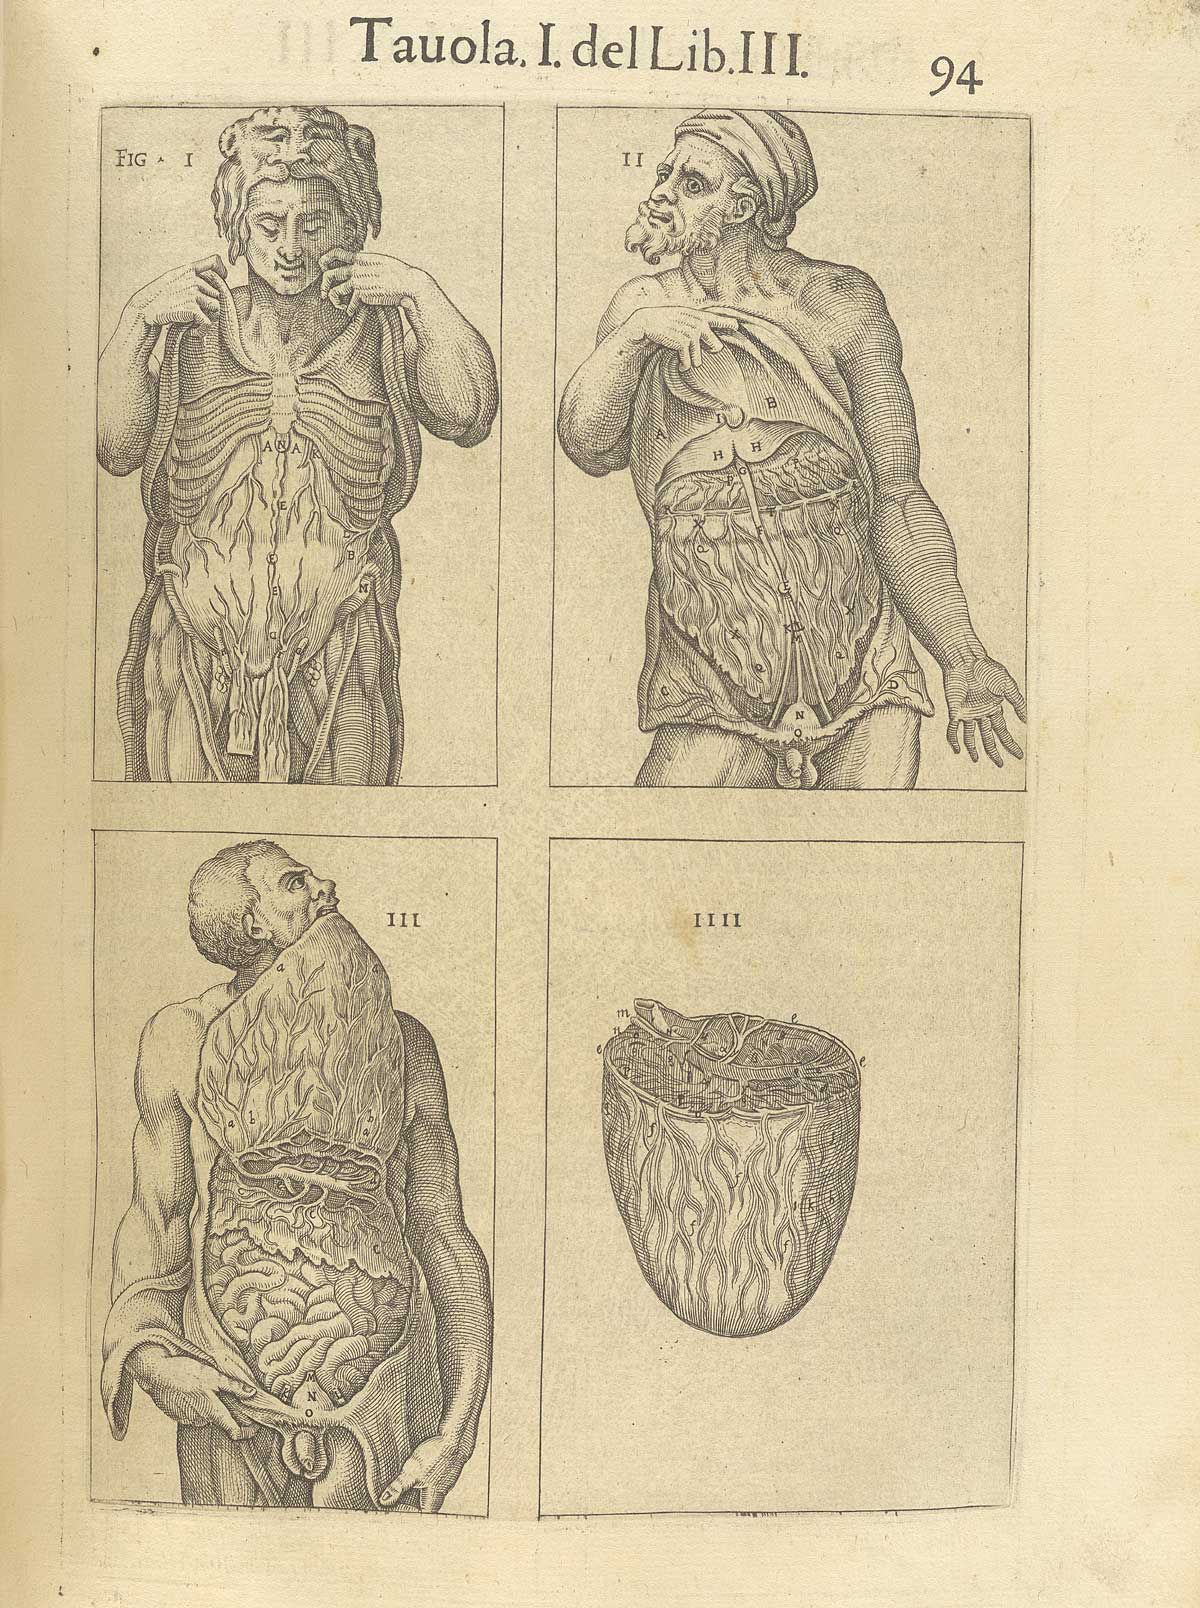 Page 94 of Juan Valverde de Amusco's Anatomia del corpo humano, featuring four figures displaying the circulatory and digestive systems under the muscles of the abdomen.